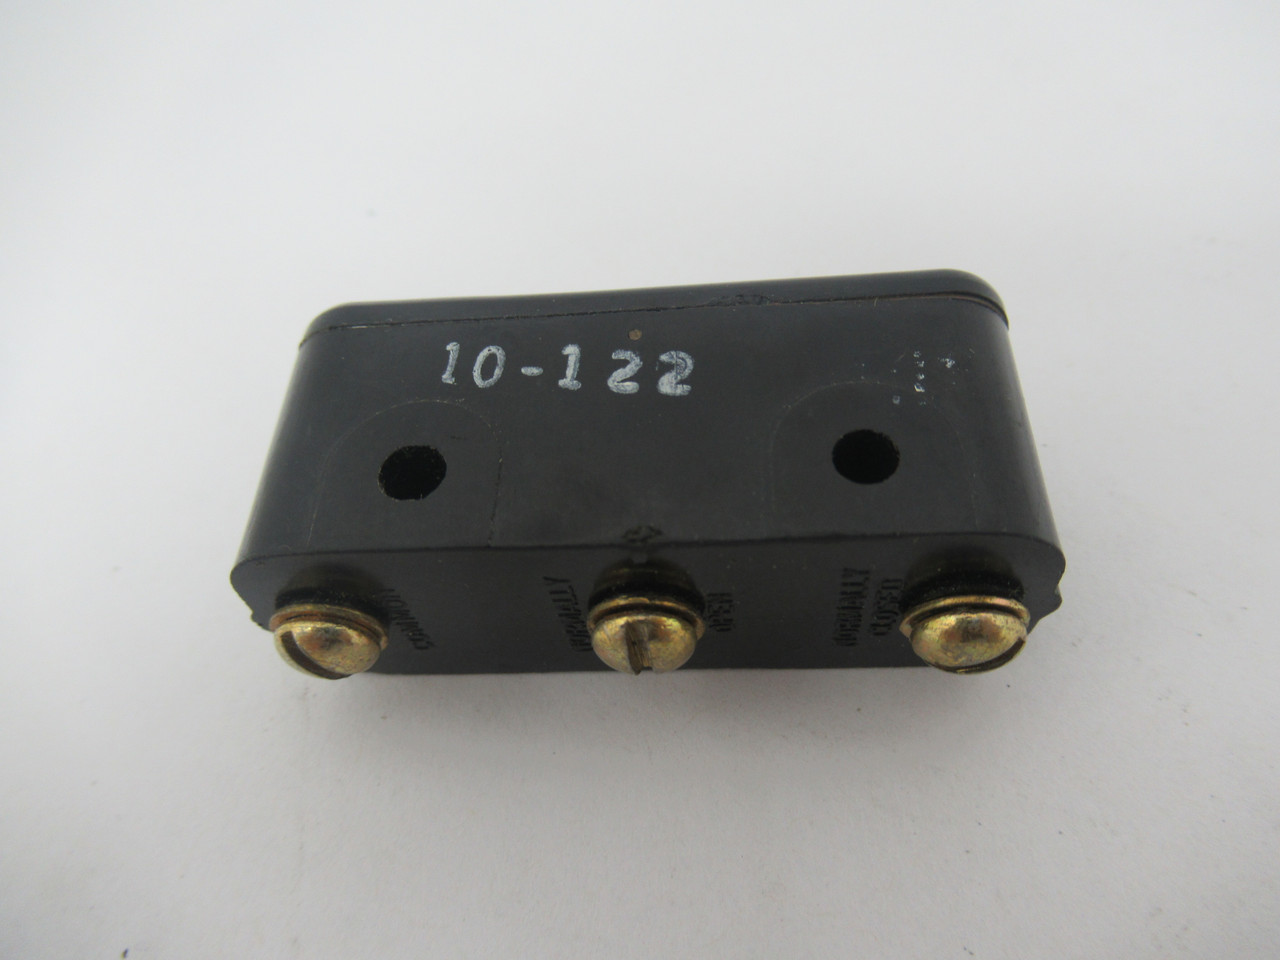 Licon 10-122 Push Button Limit Switch 1/2HP@125VAC 1HP@250VAC 1/2A@125VAC USED